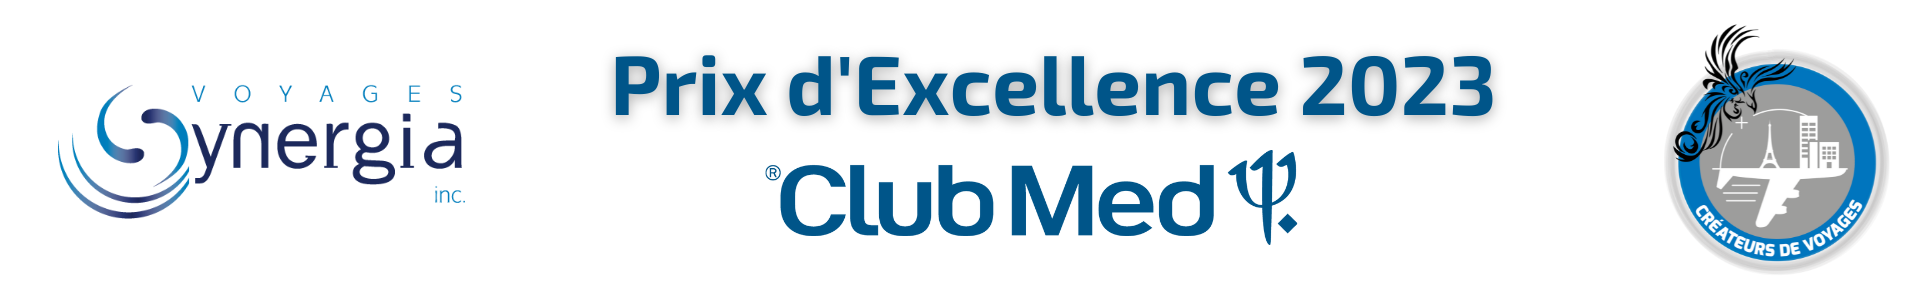 Voyages Synergia - Prix Excellence Club Med 2023